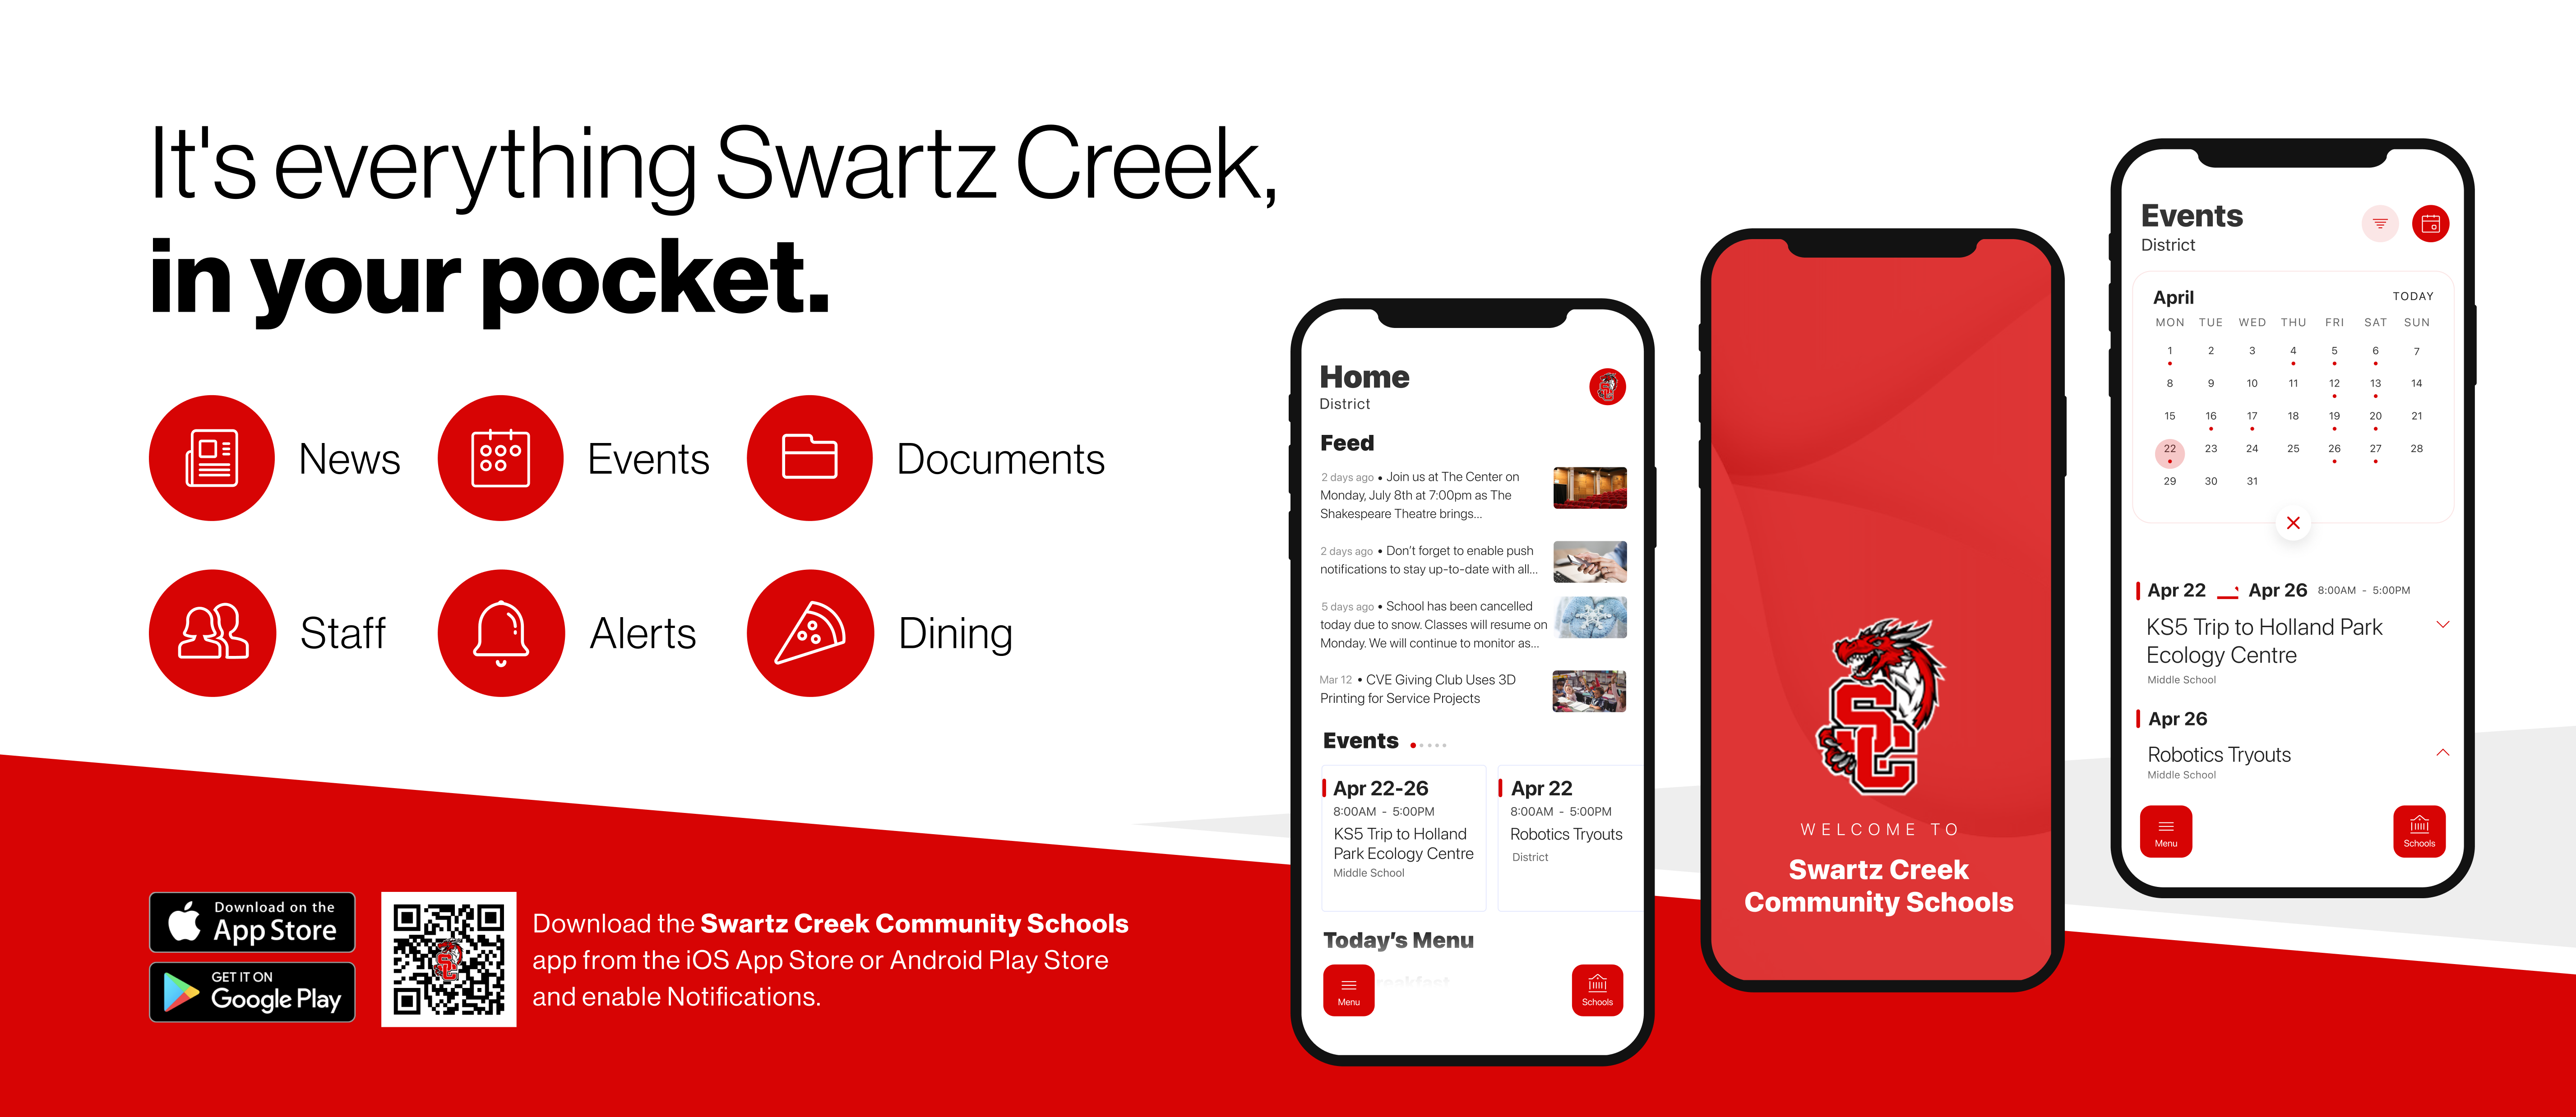 It's everything swartz creek, in your pocket.